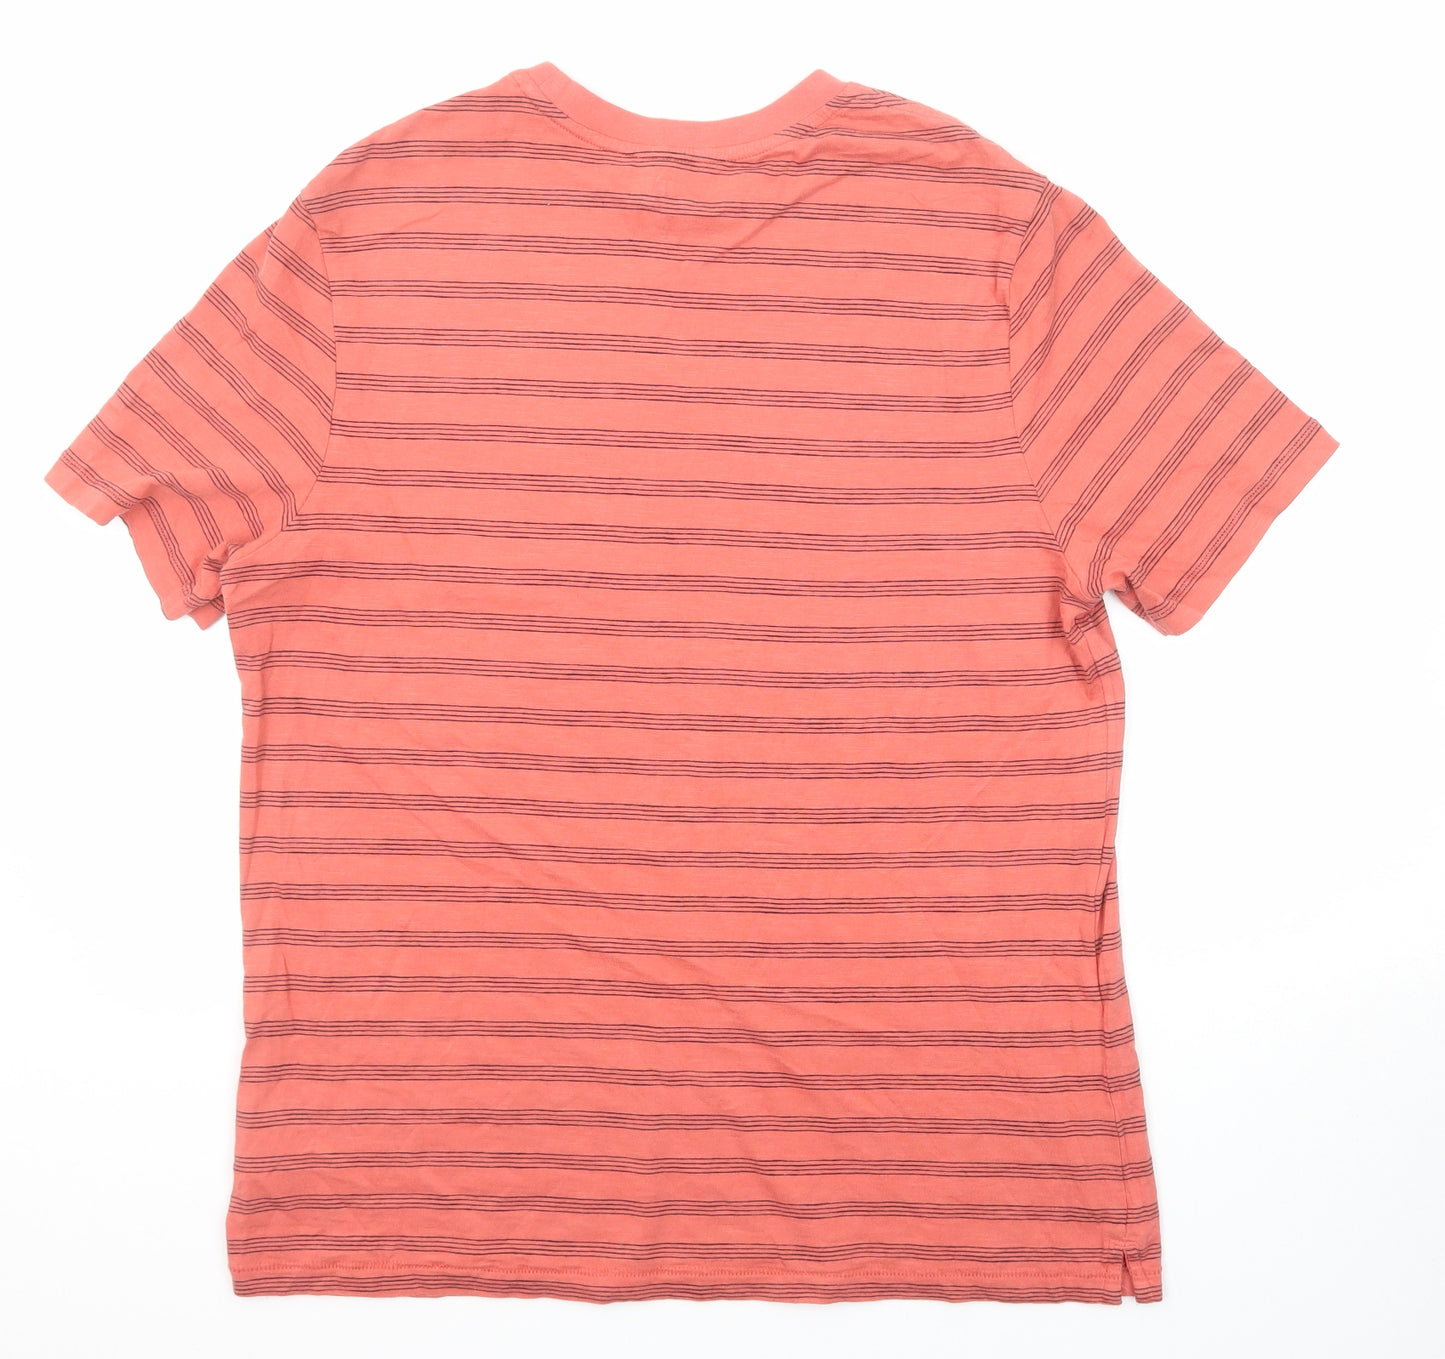 Marks and Spencer Mens Red Striped Cotton T-Shirt Size M Round Neck